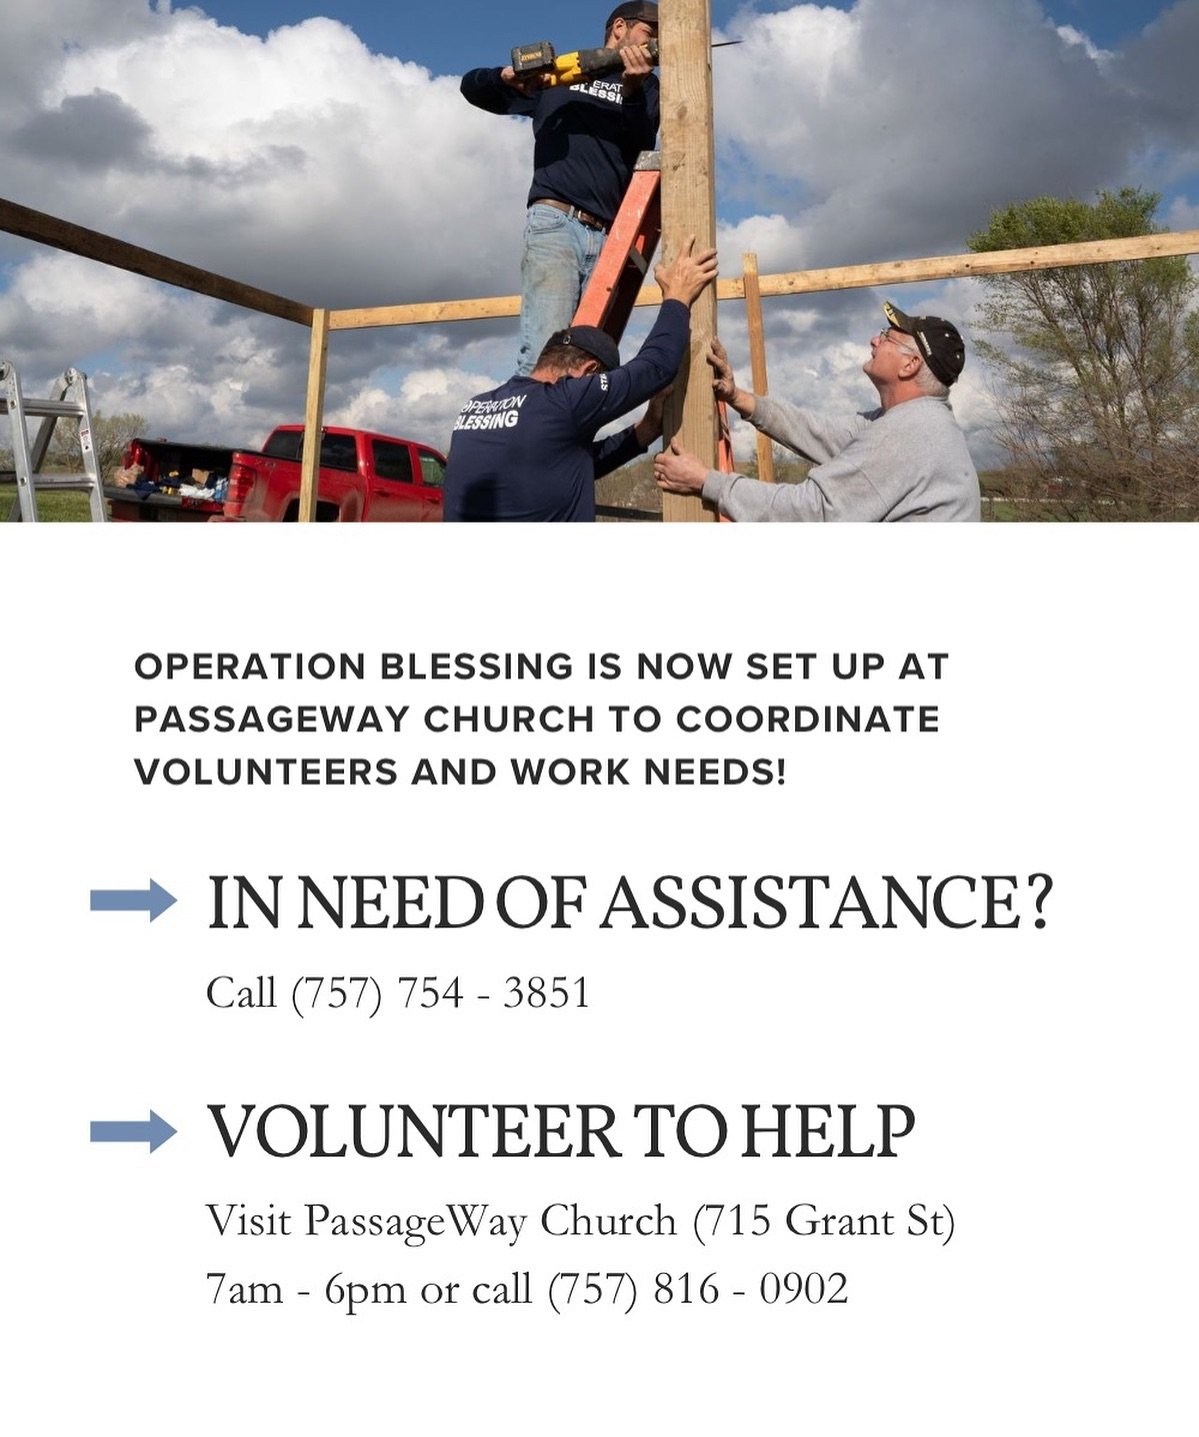 Know anyone needing assistance after last week&rsquo;s storm? Operation Blessing is now coordinating volunteers and work orders at PassageWay Church. If you would like to volunteer or want to pass along this information to anyone who needs it, Operat